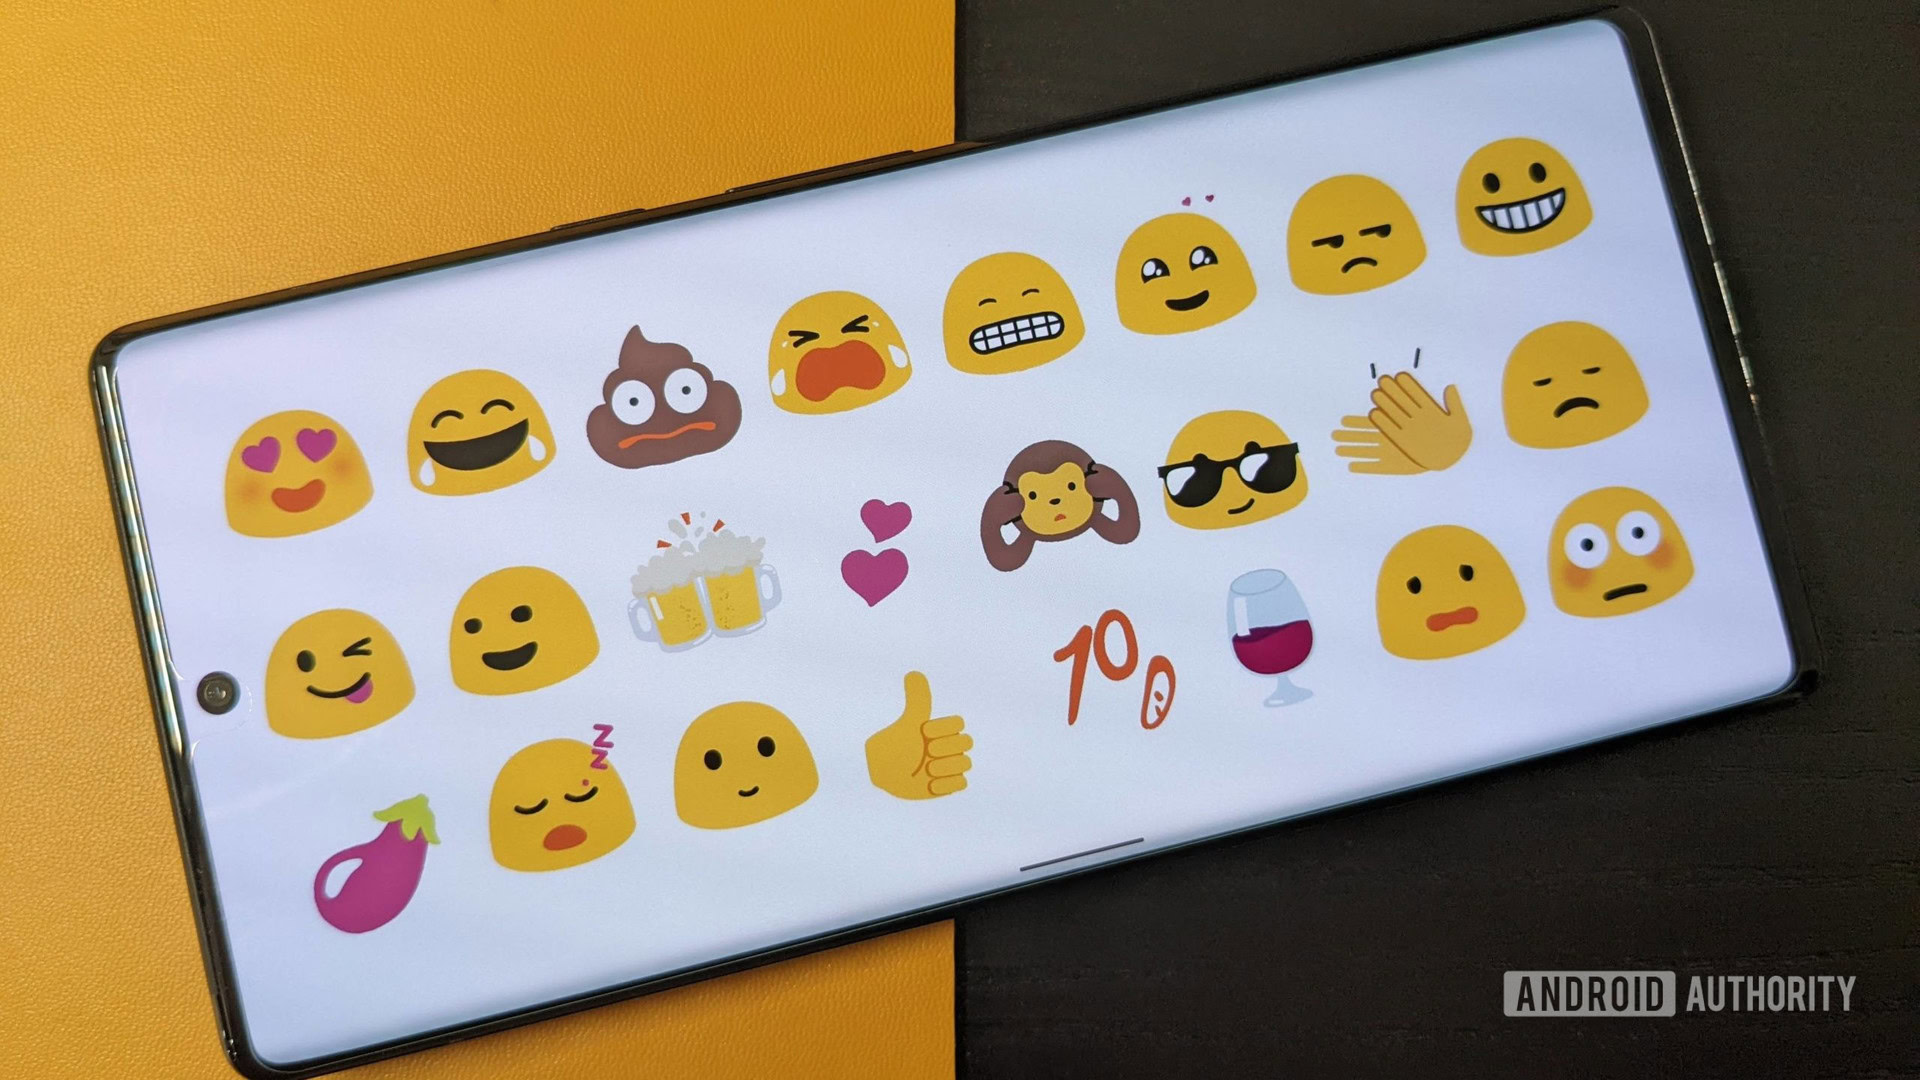 How To FIX Missing Emojis On Android! (2022) 